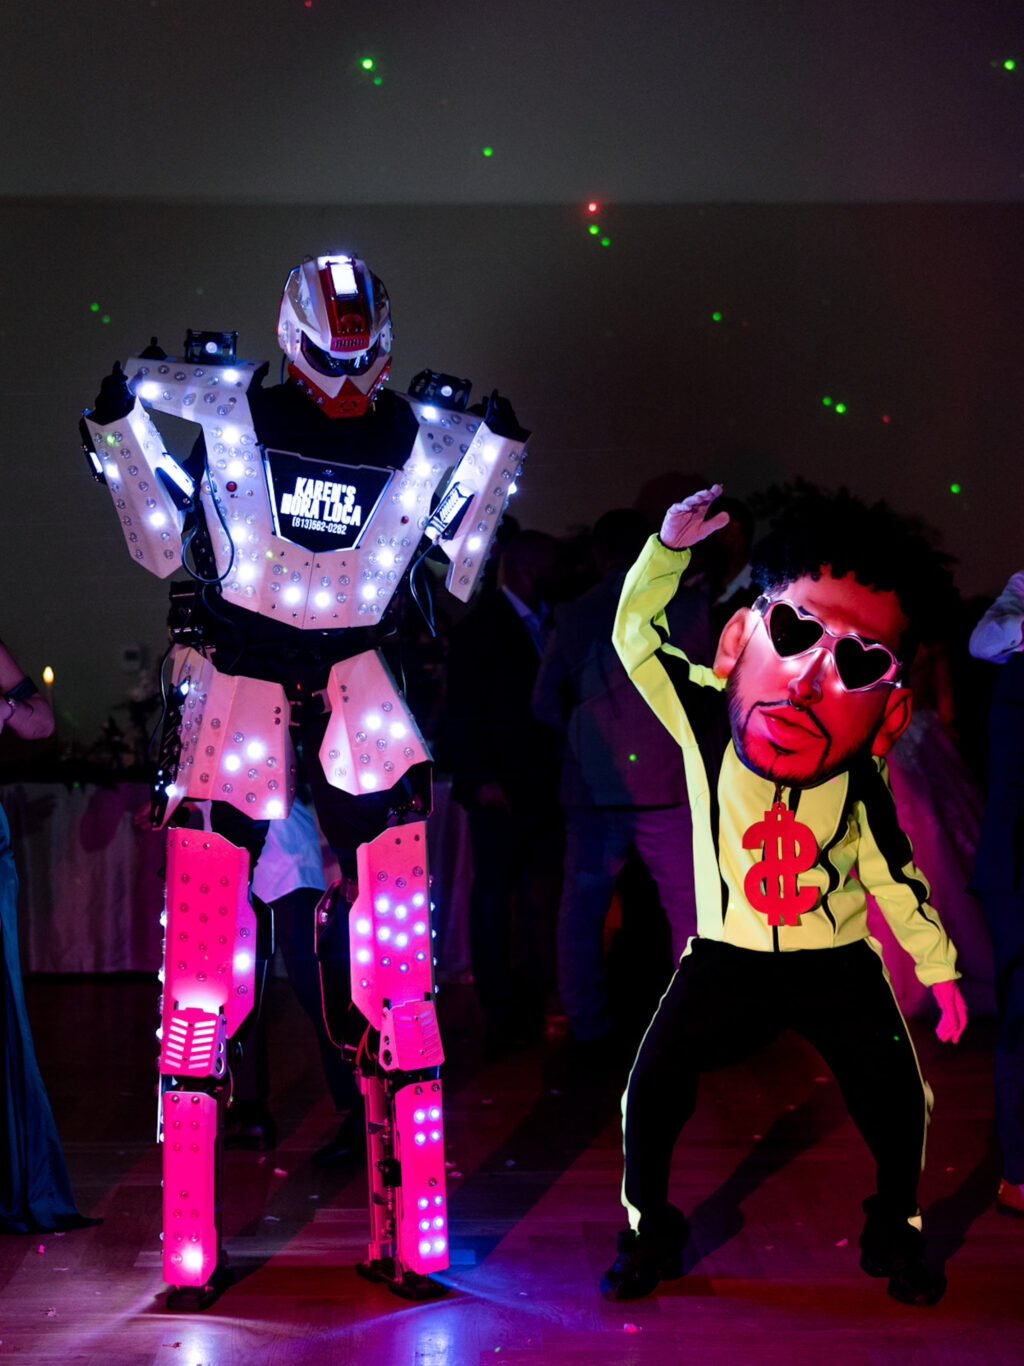 Hora Loca LED Light-up Robot Wedding Reception After Party Entertainment Ideas